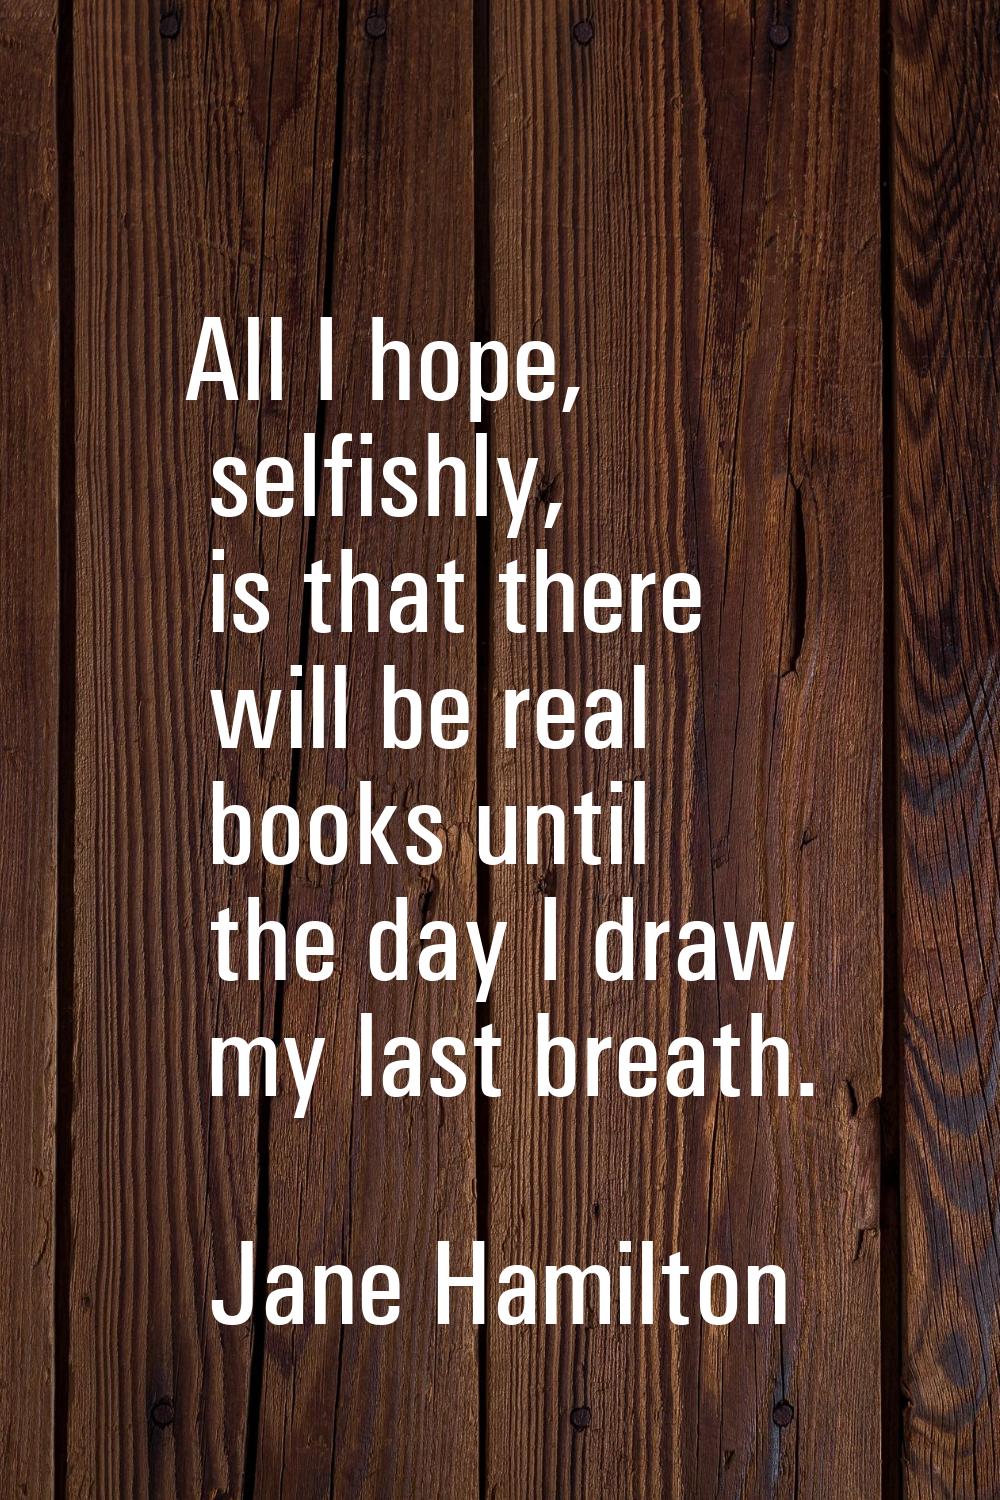 All I hope, selfishly, is that there will be real books until the day I draw my last breath.